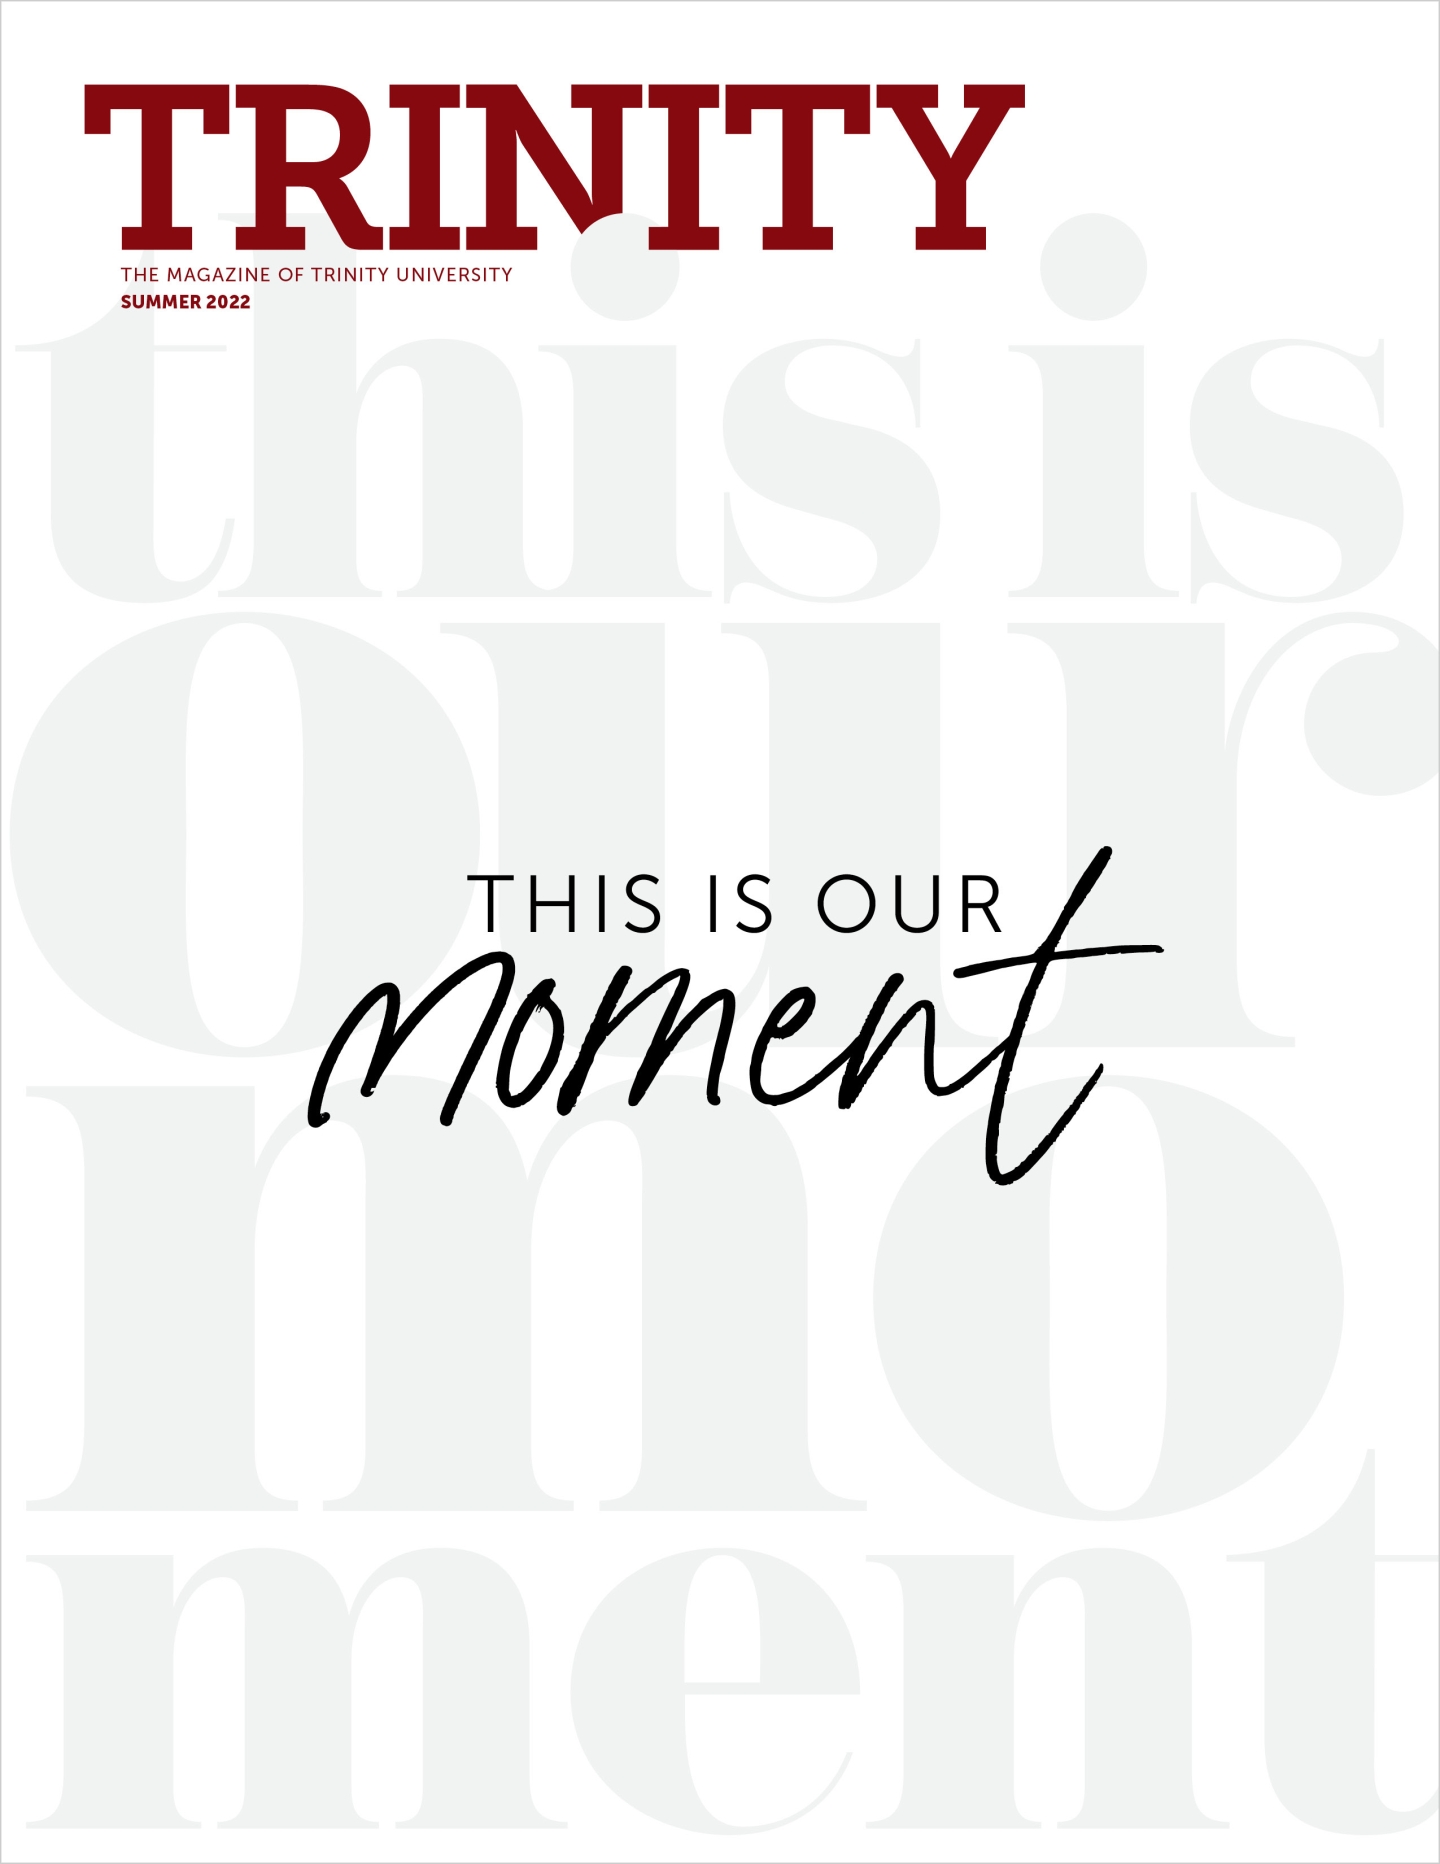 the front cover of the Summer 2022 Trinity Magazine reads "This is our moment"